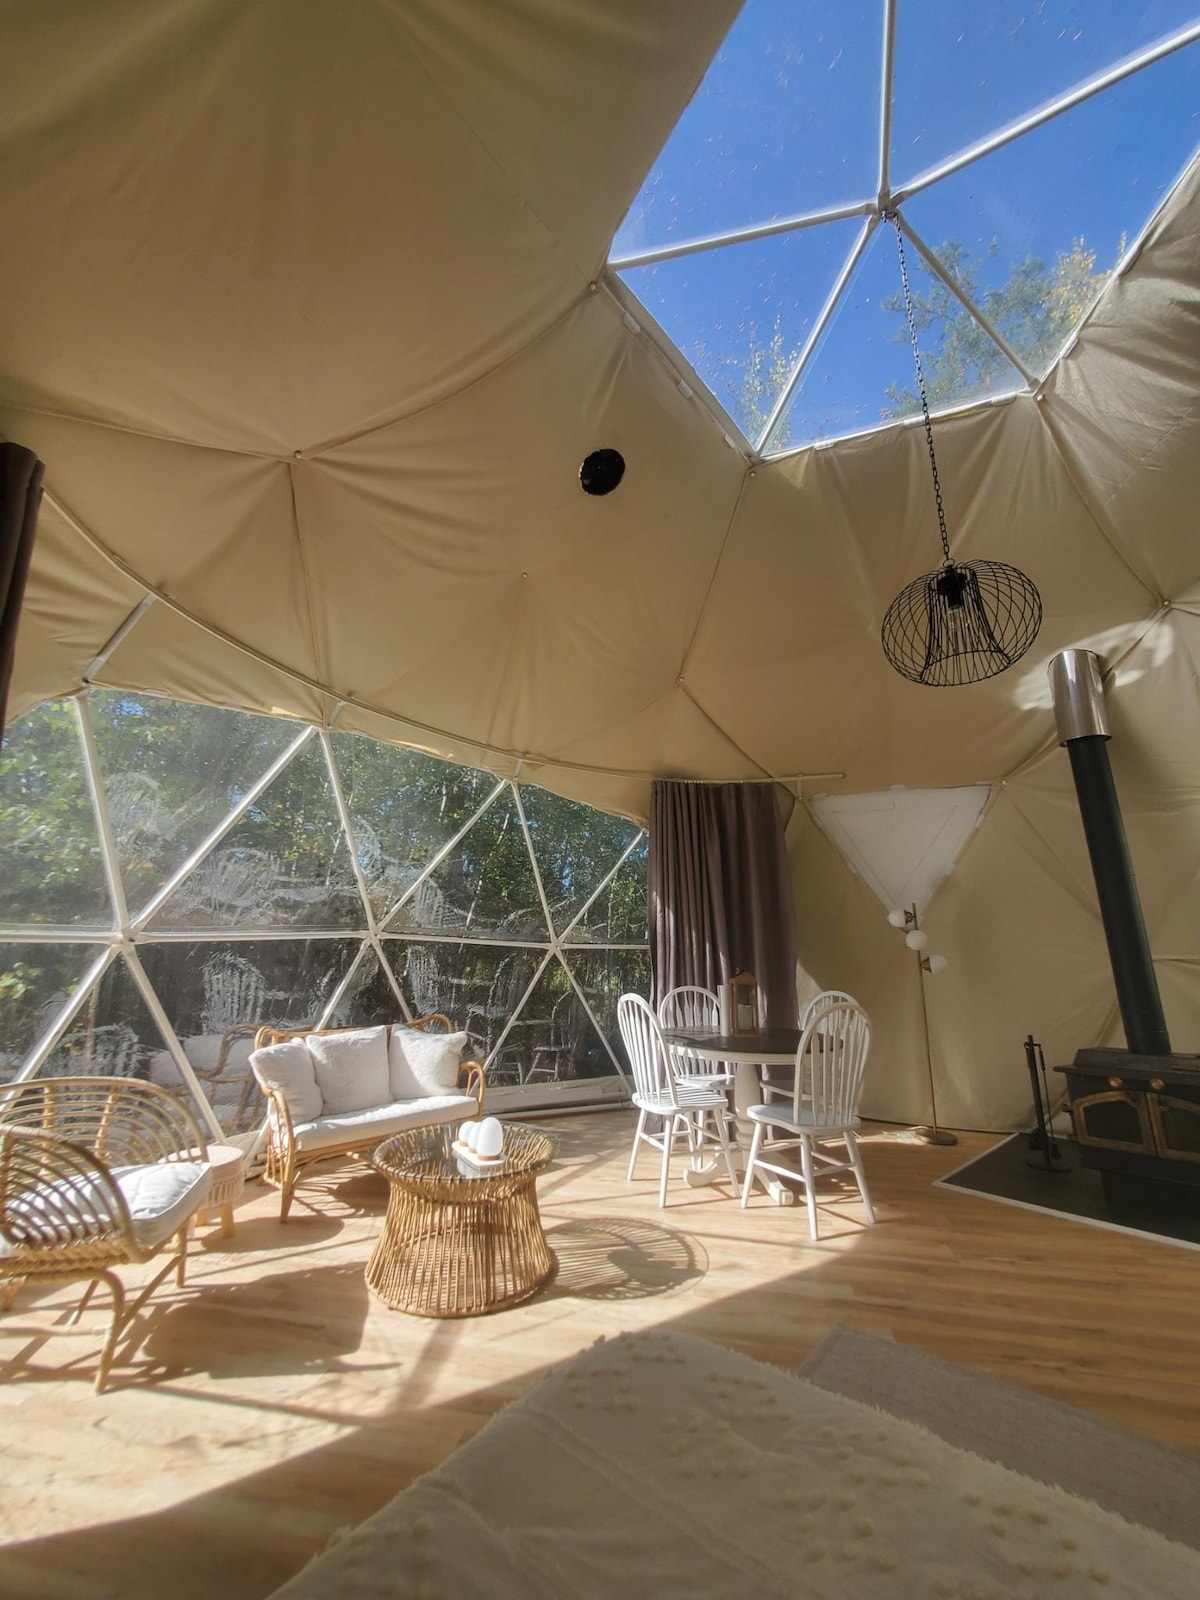 Dome Cabin In The Woods